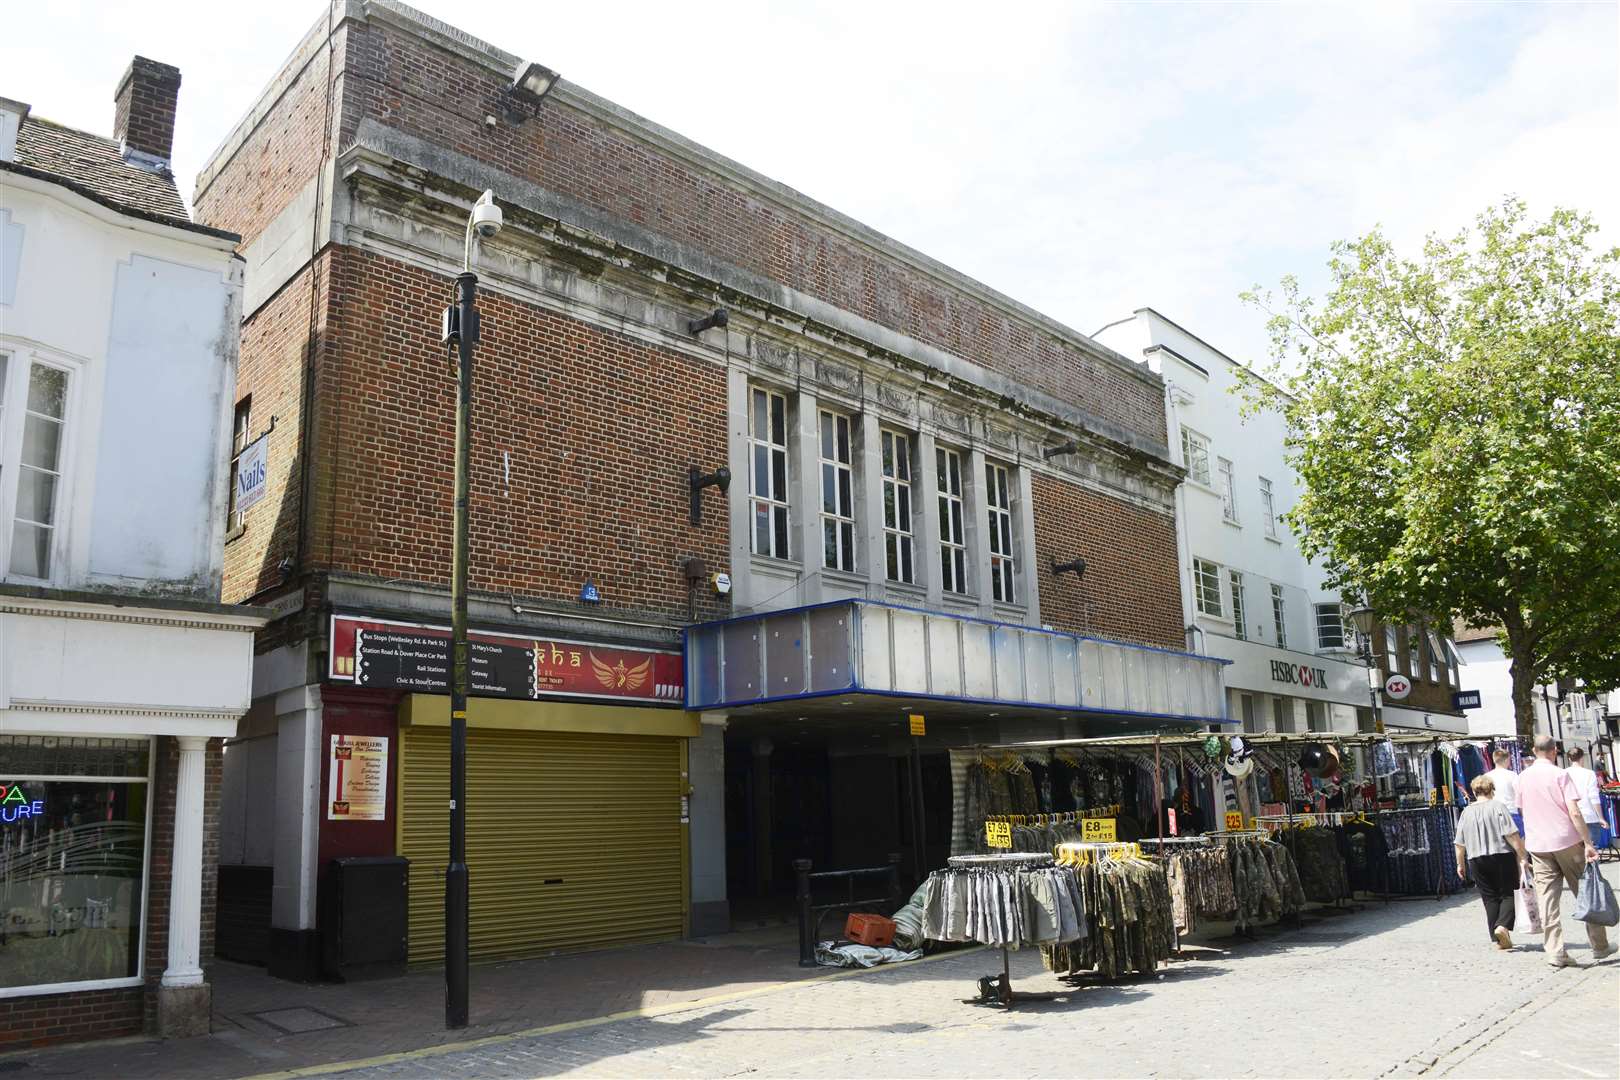 The former Mecca Bingo building in Ashford. Picture: Paul Amos